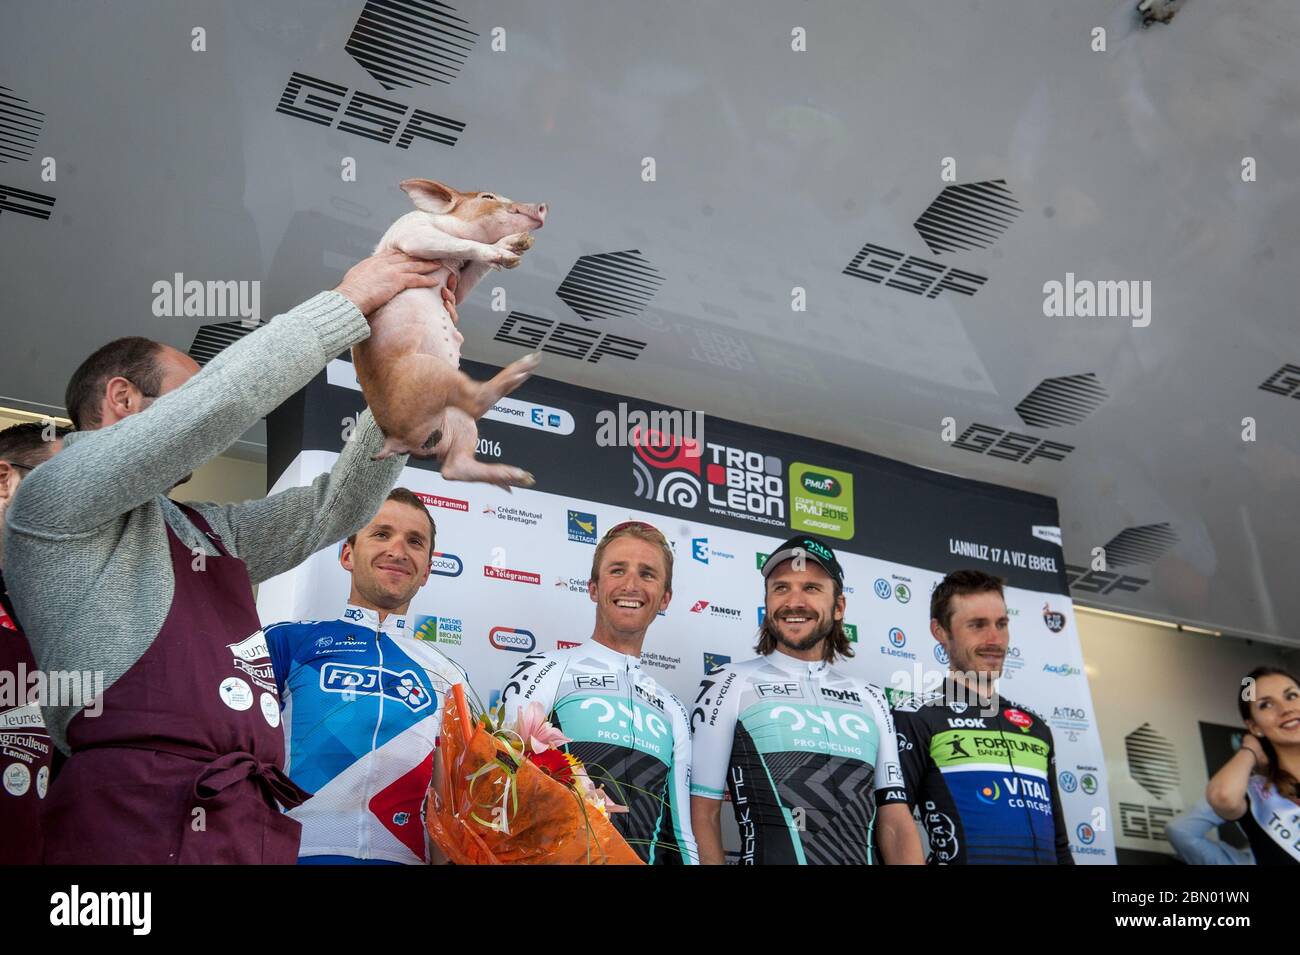 17.04.2016 Brittany, France. Laurent Pichon (Fra) FDJ wins the prize (a pig) for the best placed local rider. Tro-Bro Léon. Stock Photo